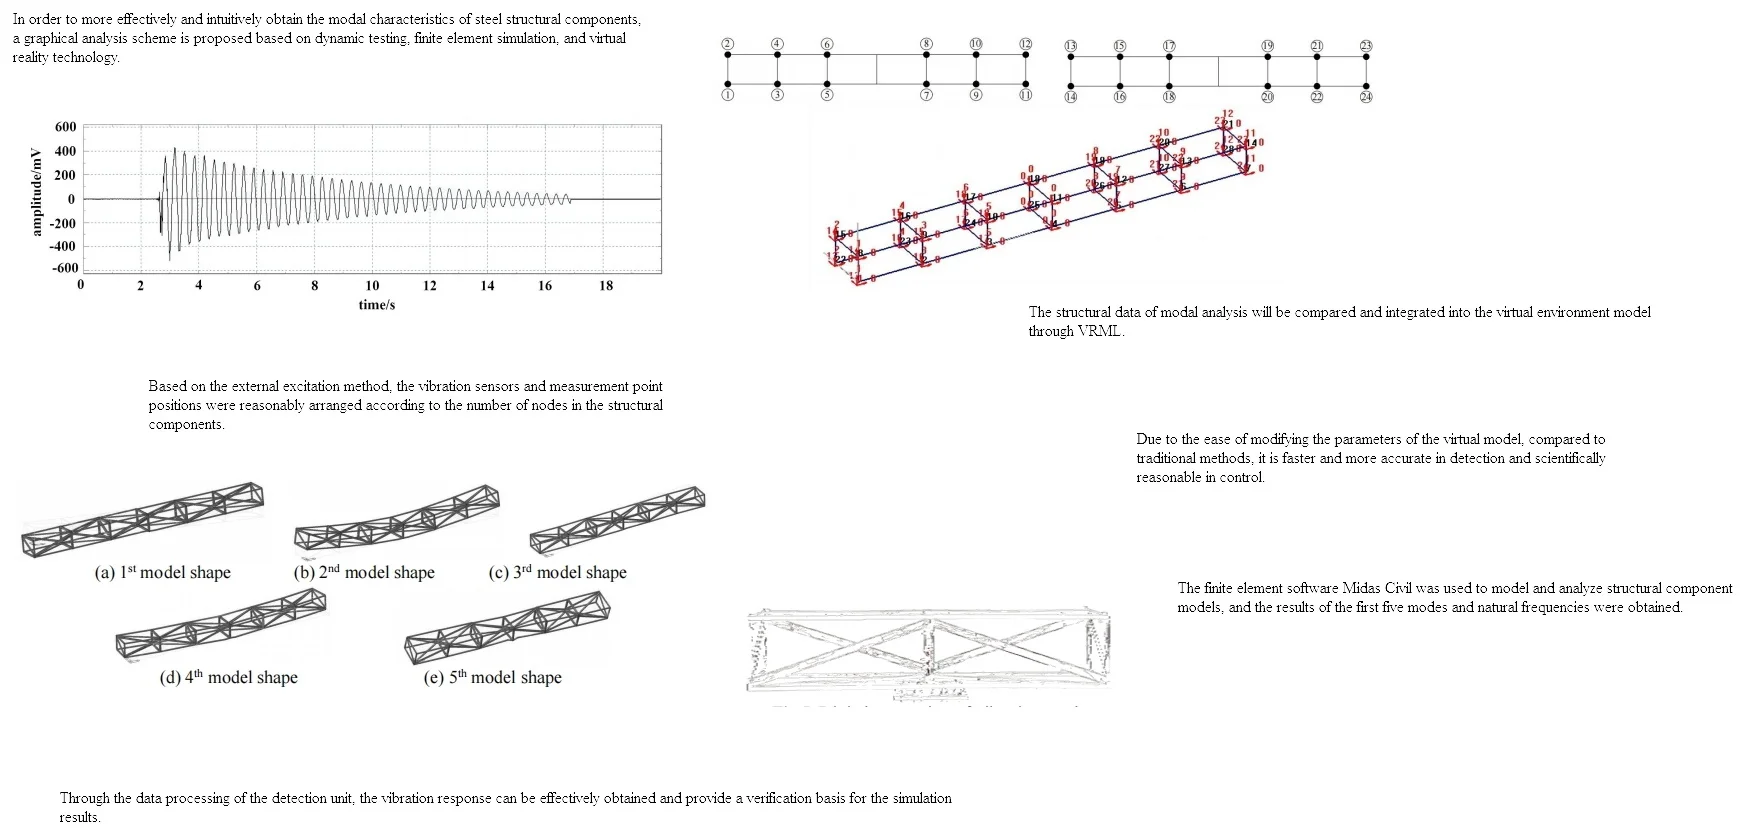 Study on vibration characteristics of structural components based on virtual reality technology